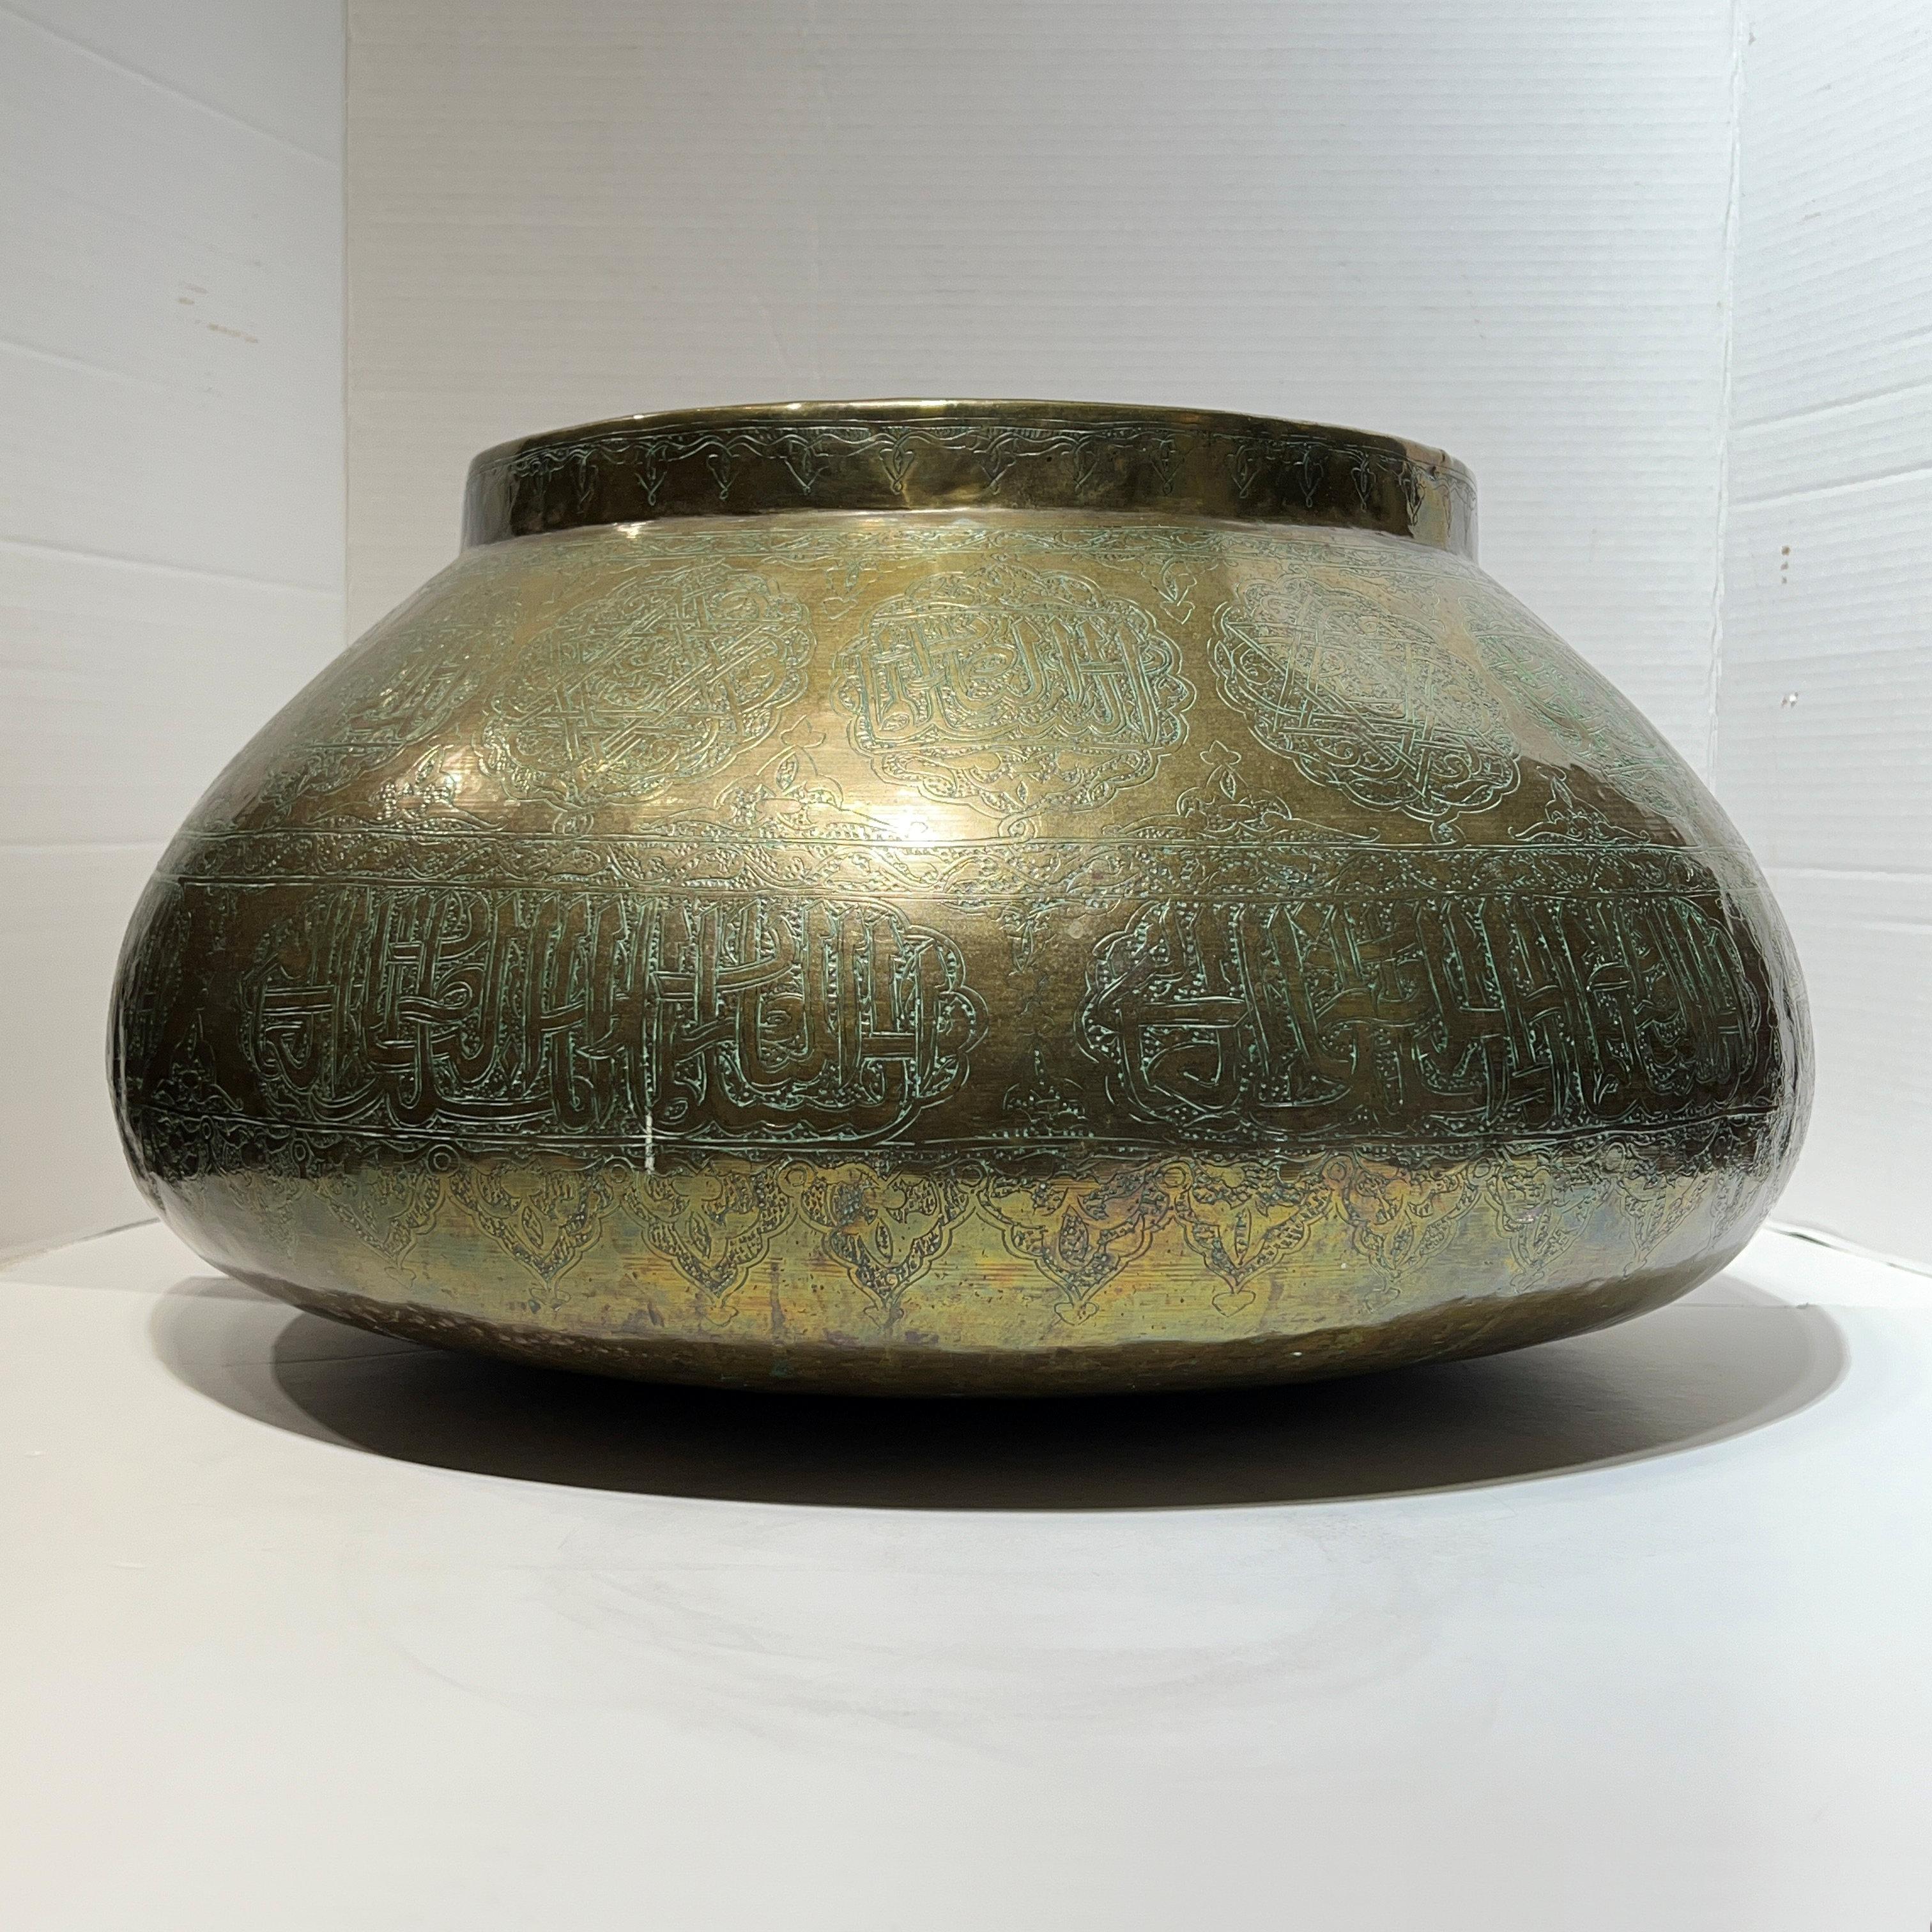 Large 19th Century Islamic Middle Eastern Engraved Brass Centerpiece Bowl For Sale 12